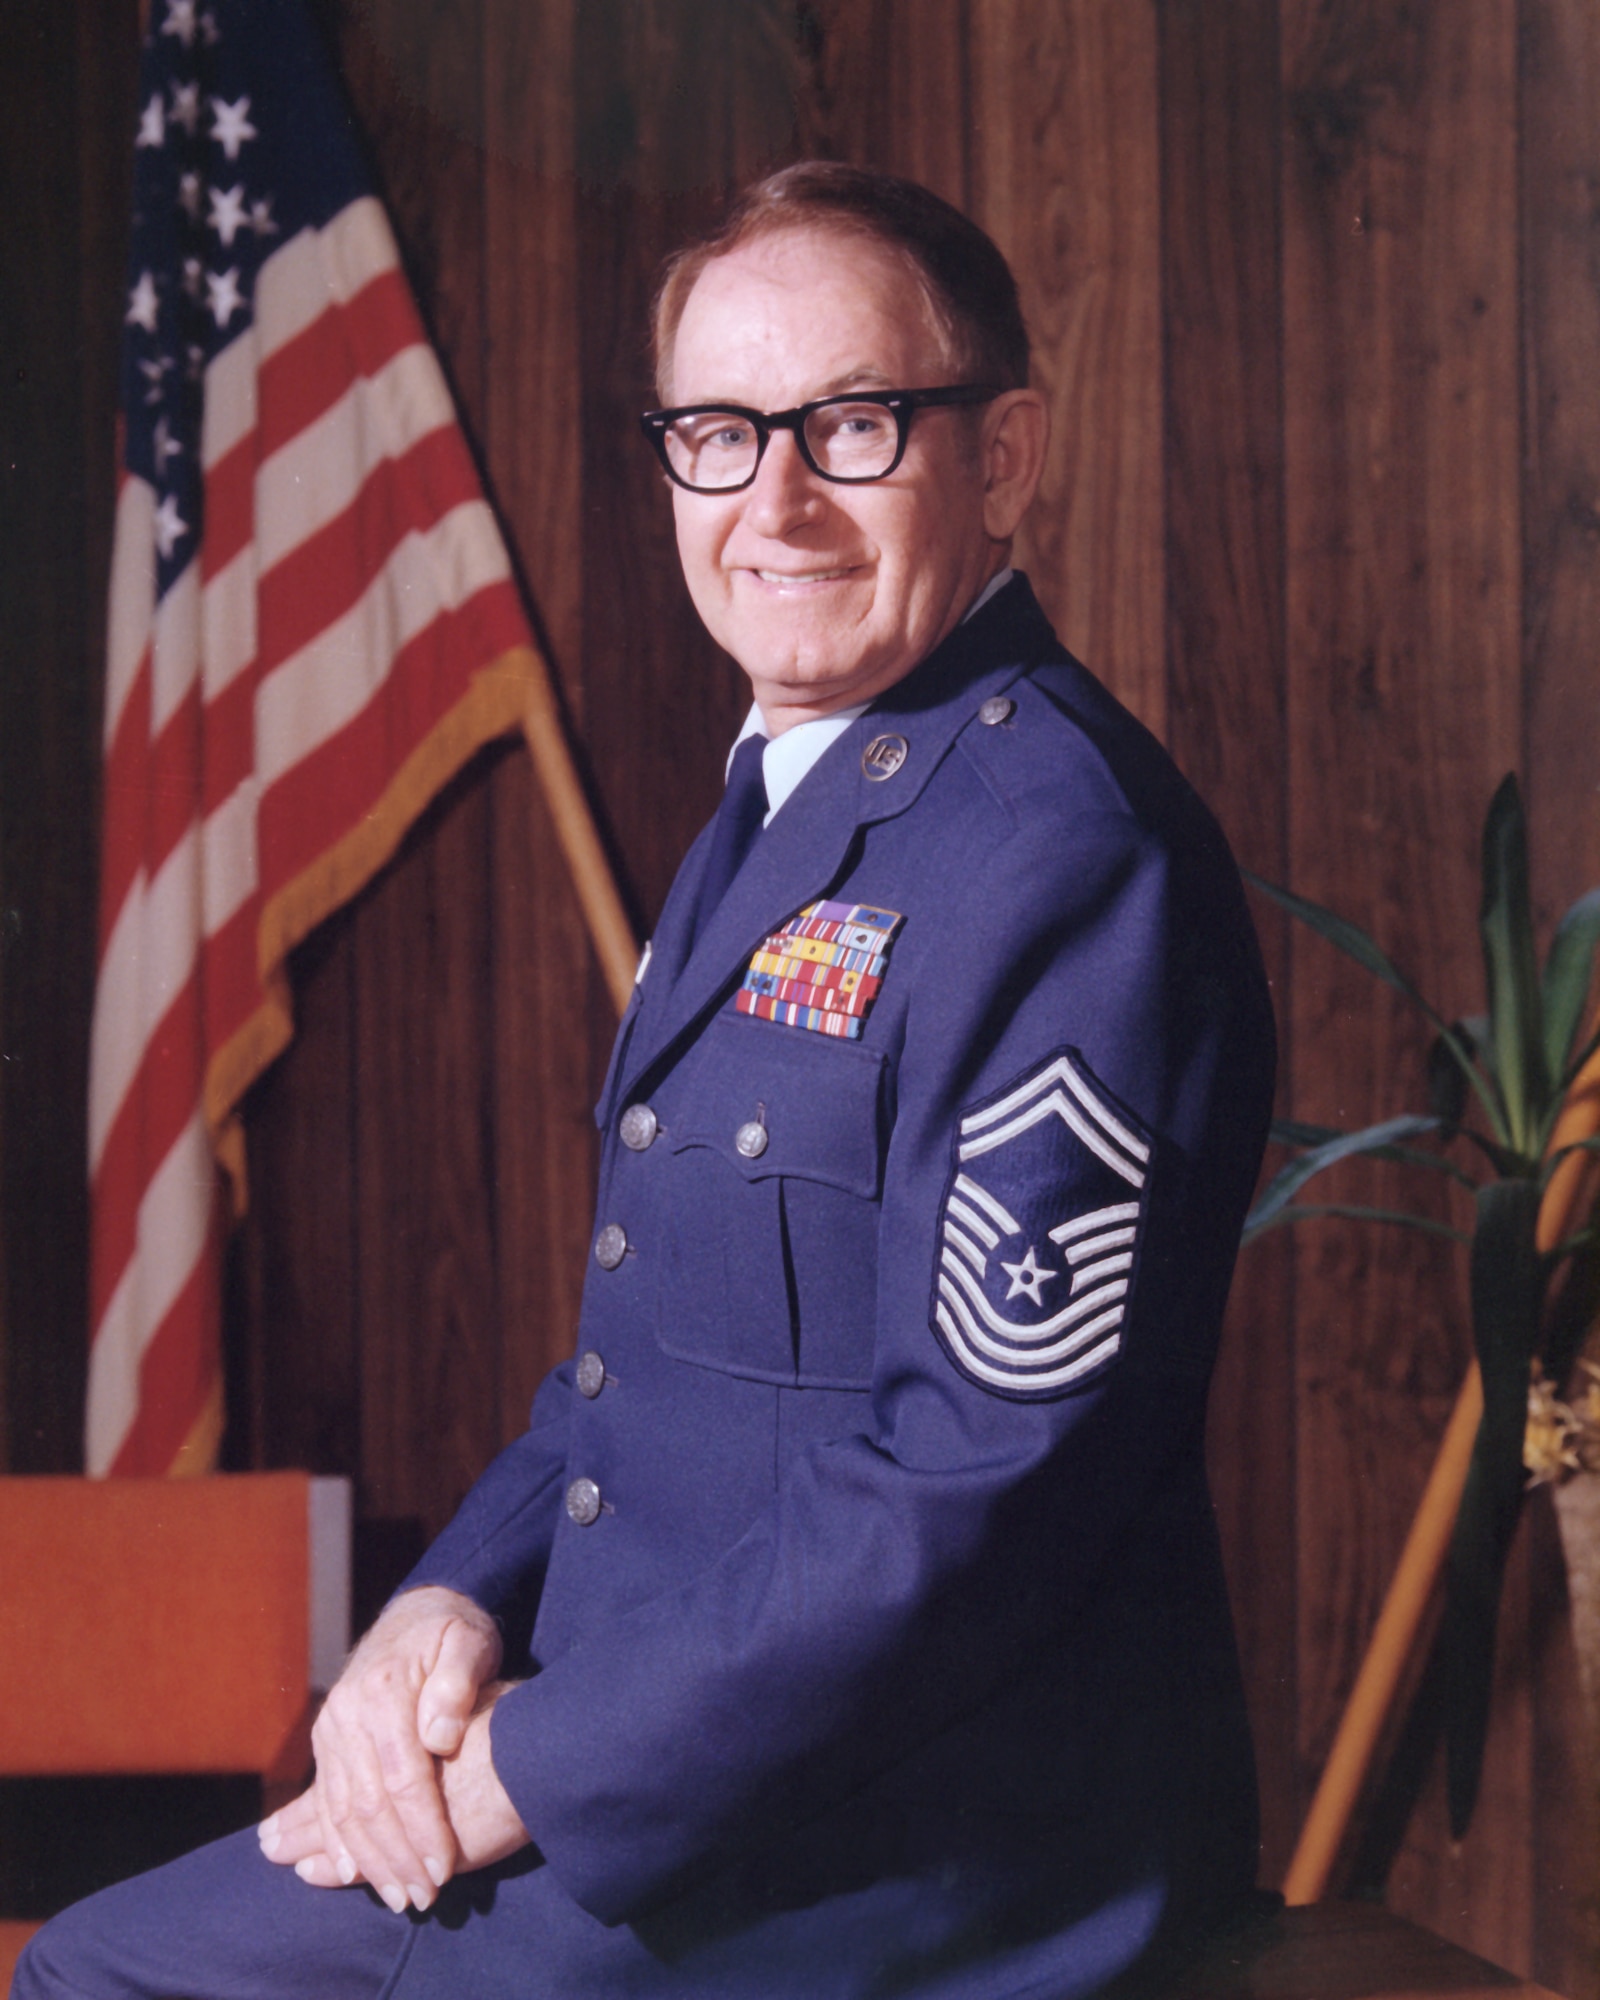 Chief Master Sgt. Paul H. Lankford was a survivor of the Bataan Death March in the Philippine Islands and in a Japanese prison camp for three years who went on to help stand up the Air National Guard’s premiere school for enlisted leadership. The Paul H. Lankford Professional Military Education Center at McGhee Tyson Air National Guard Base, Tenn., is his legacy. Lankford served as commandant from 1968 to 1981. He passed away in 2008 with more than 42 years of service in the active duty Air Force and Air Guard. (U.S. Air Force file photo/Released)